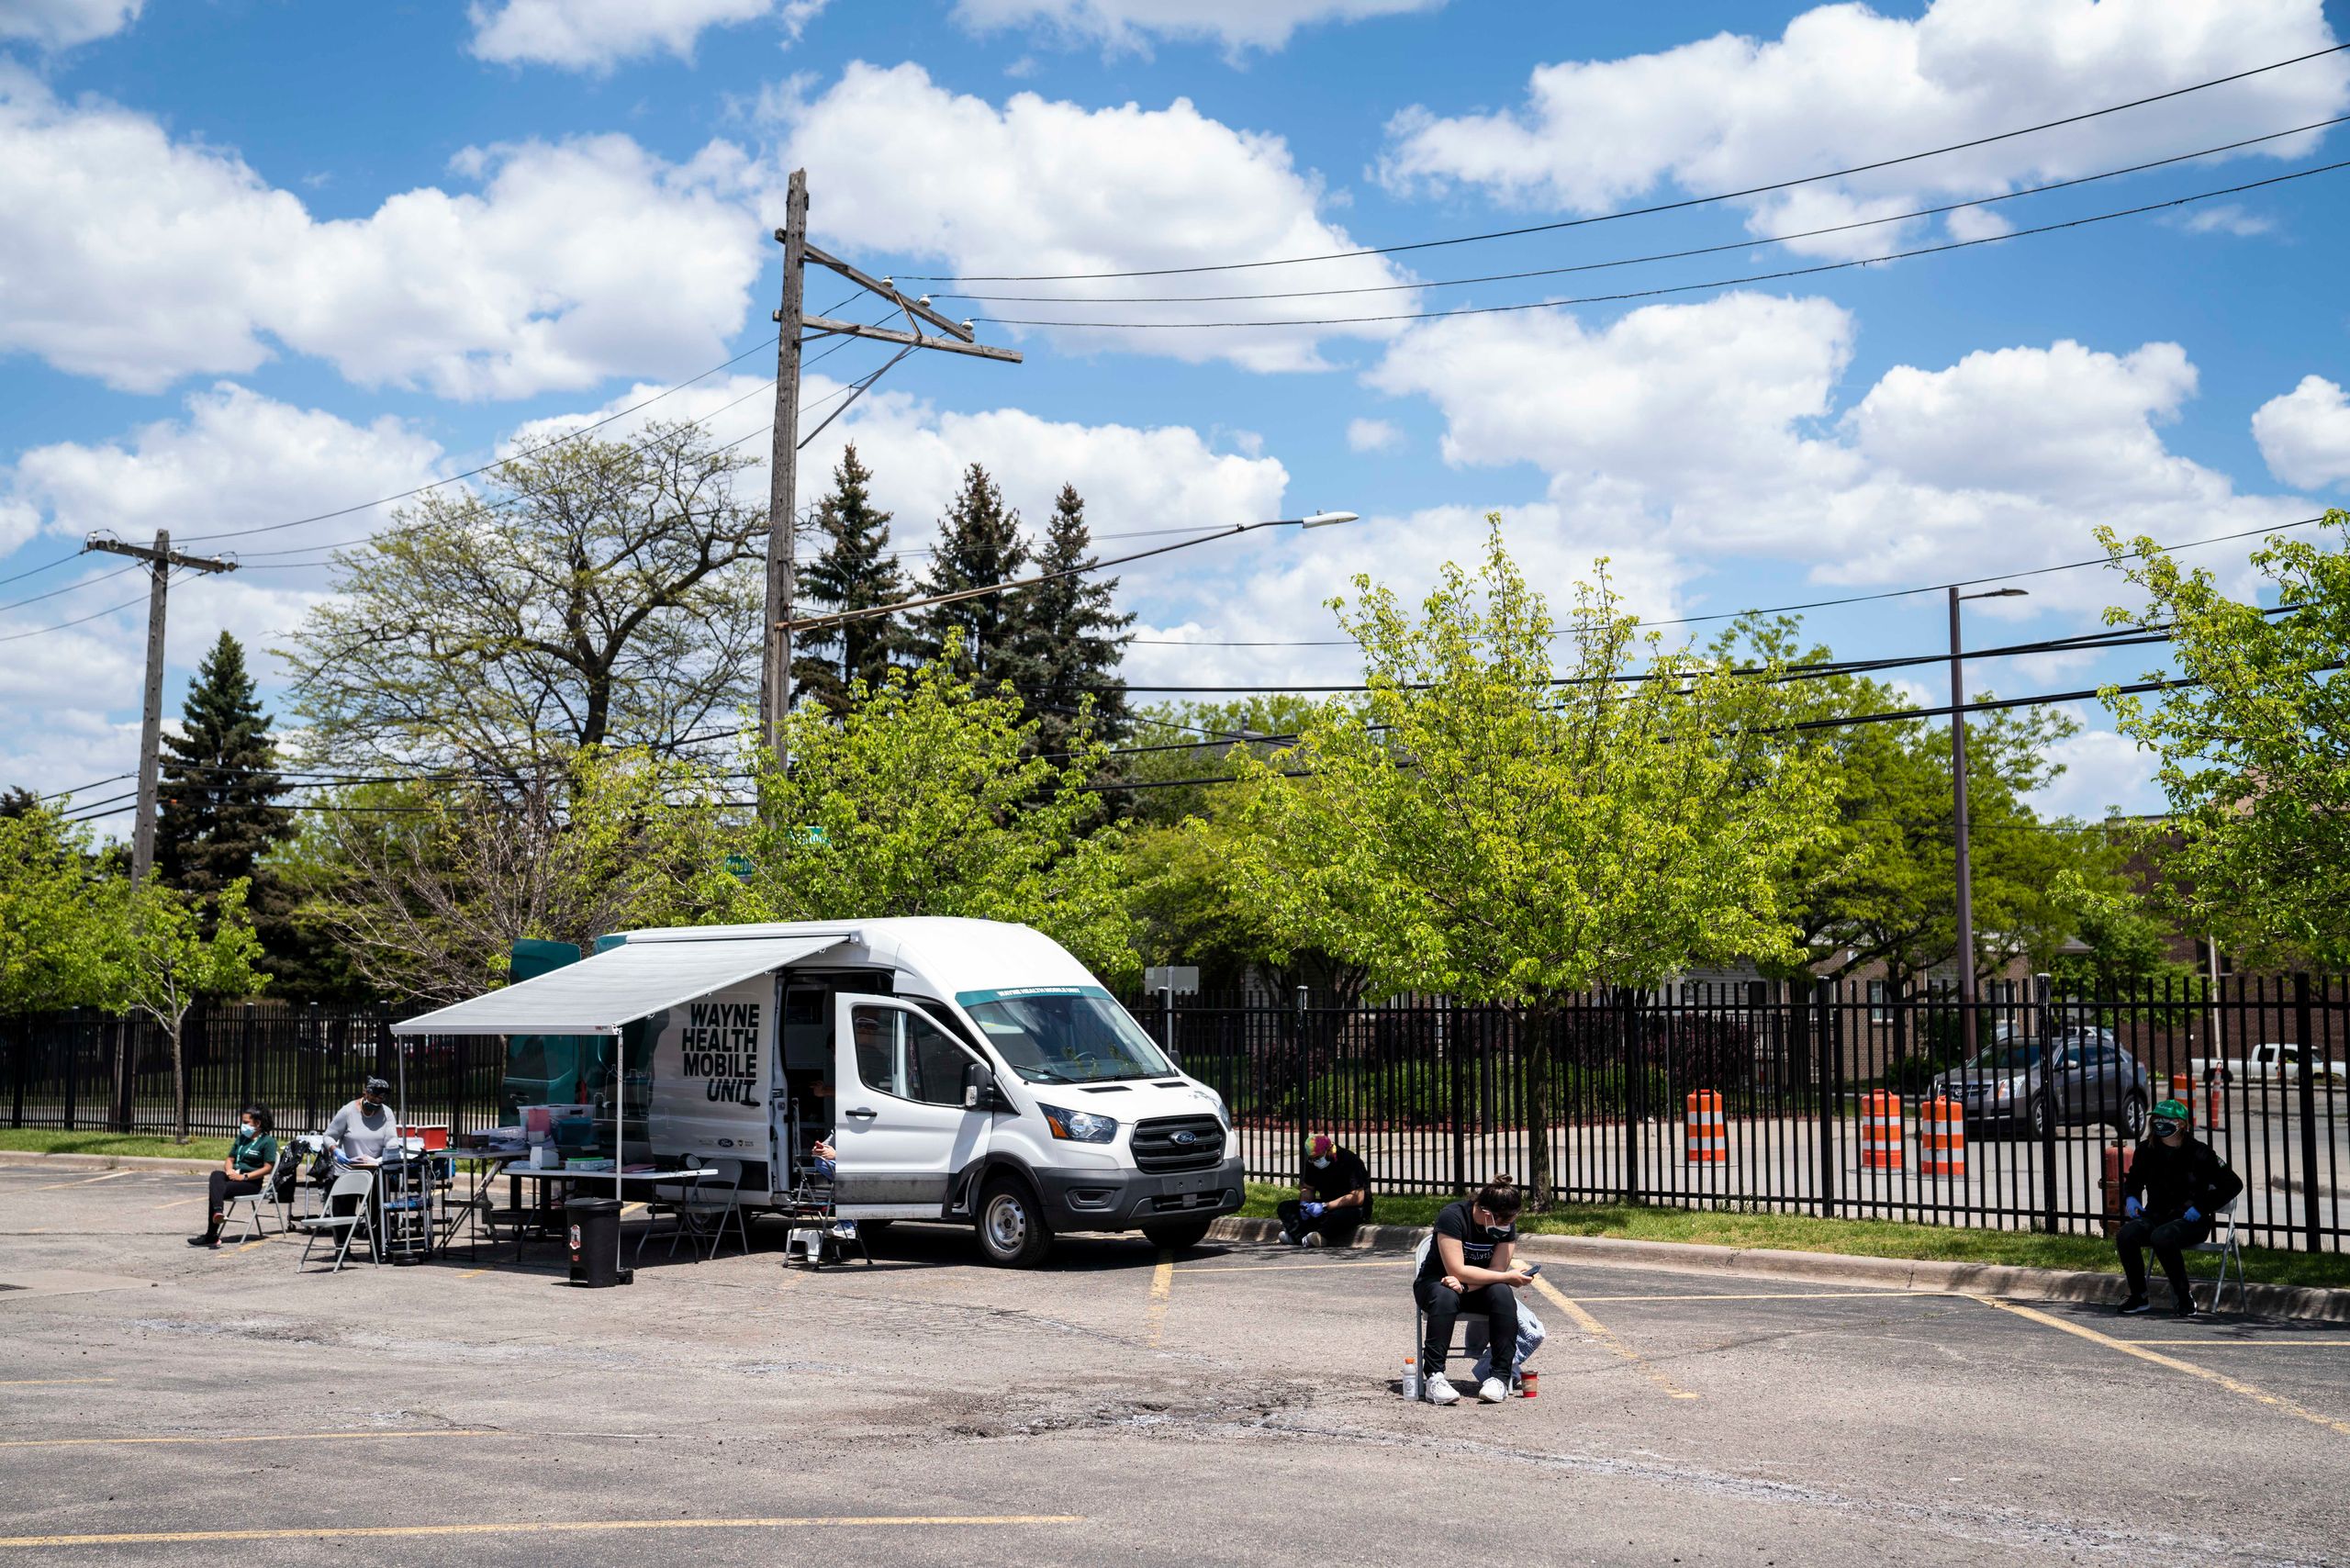 Staff wait for patients who want a COVID-19 vaccine at one of the Wayne Health Mobile Units in Detroit, May 14, 2021. On this